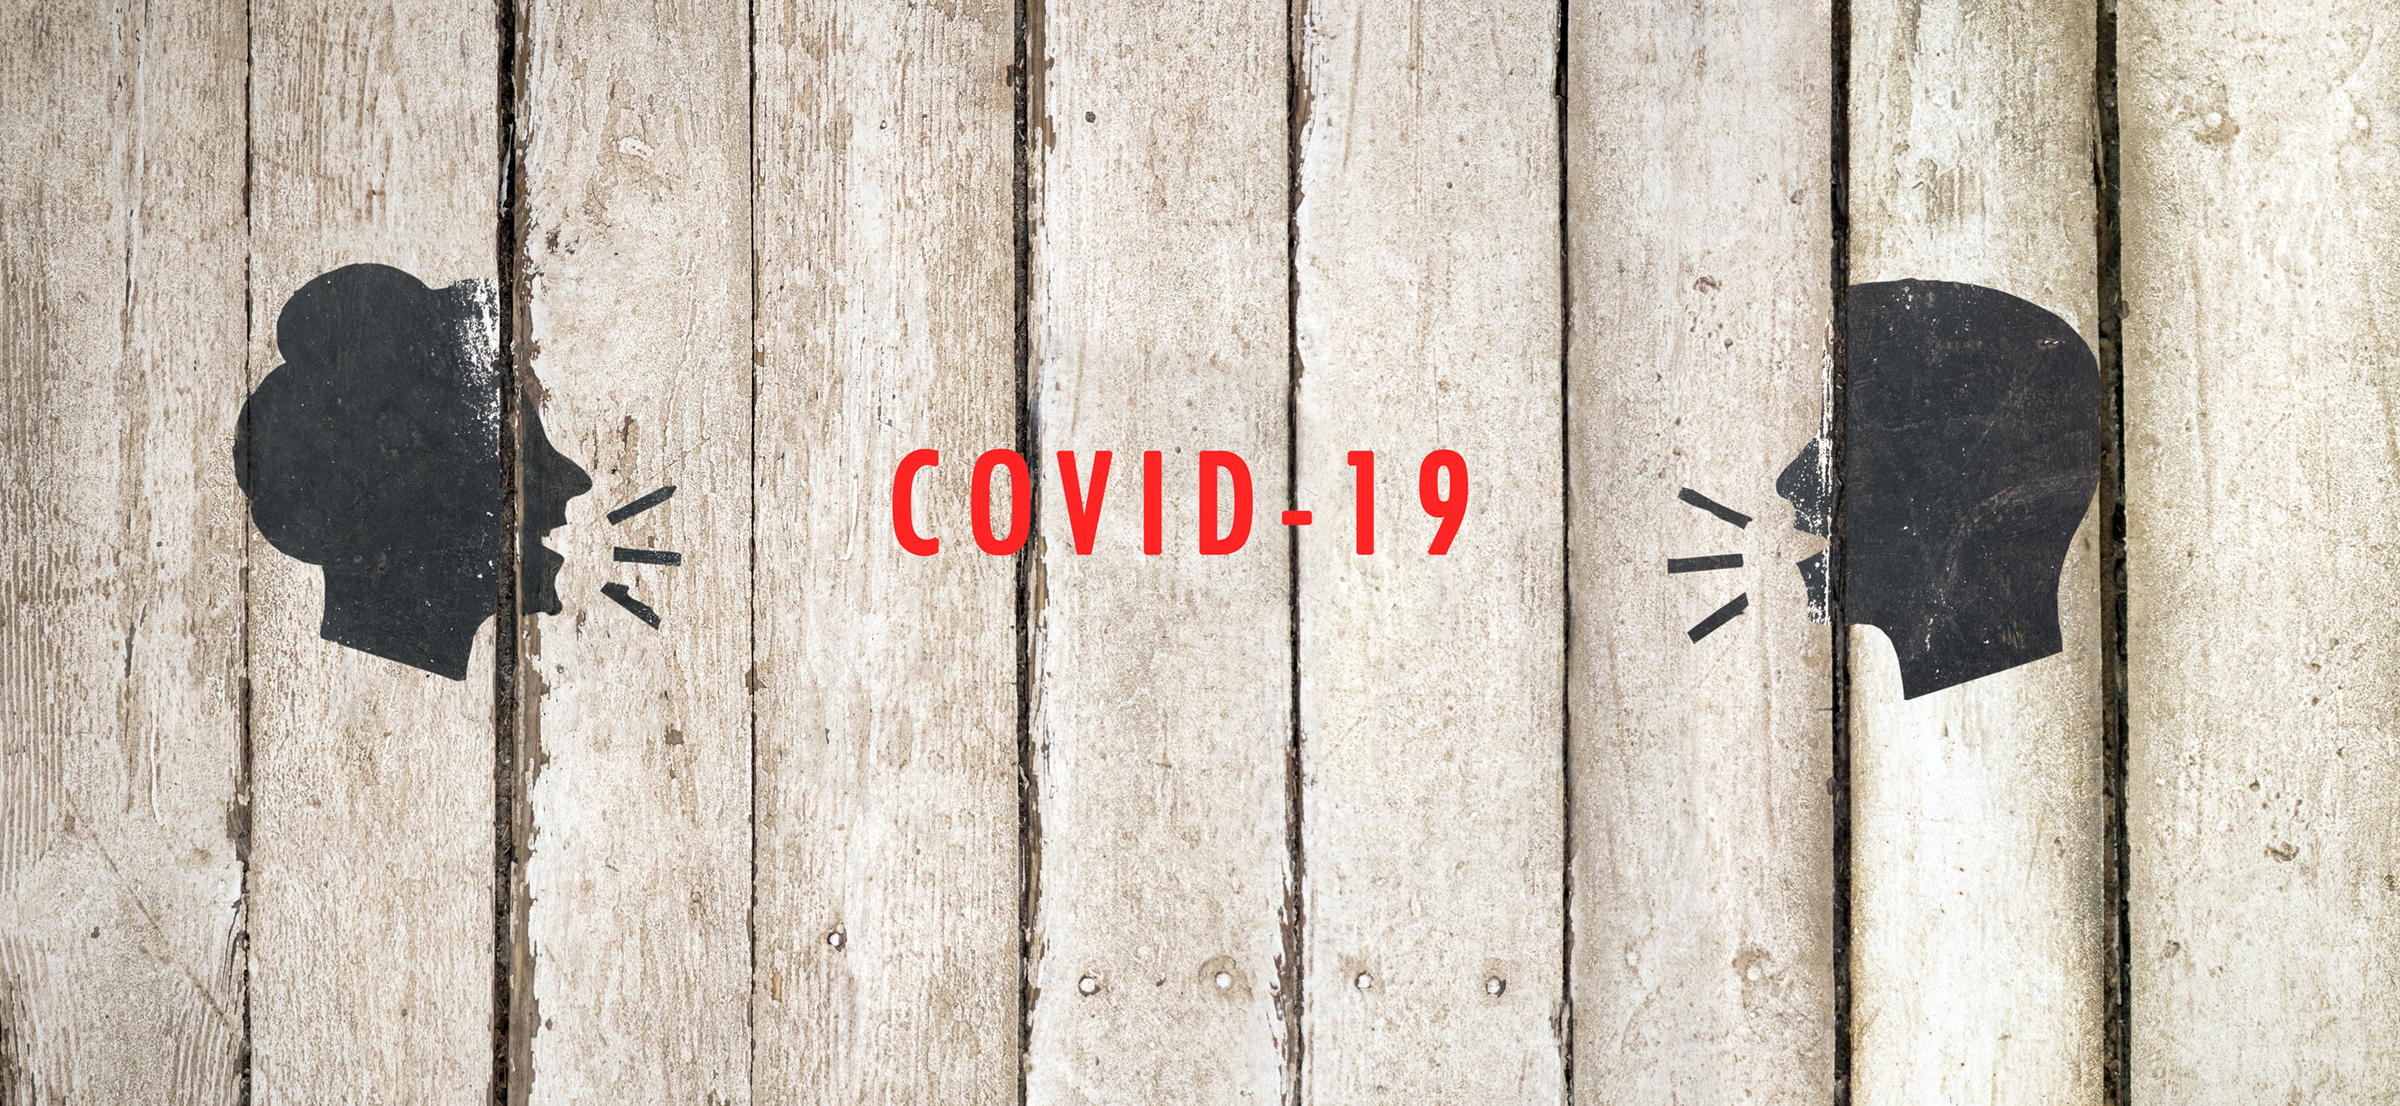 Cutout of two people talking to each other over COVID-19 lettering